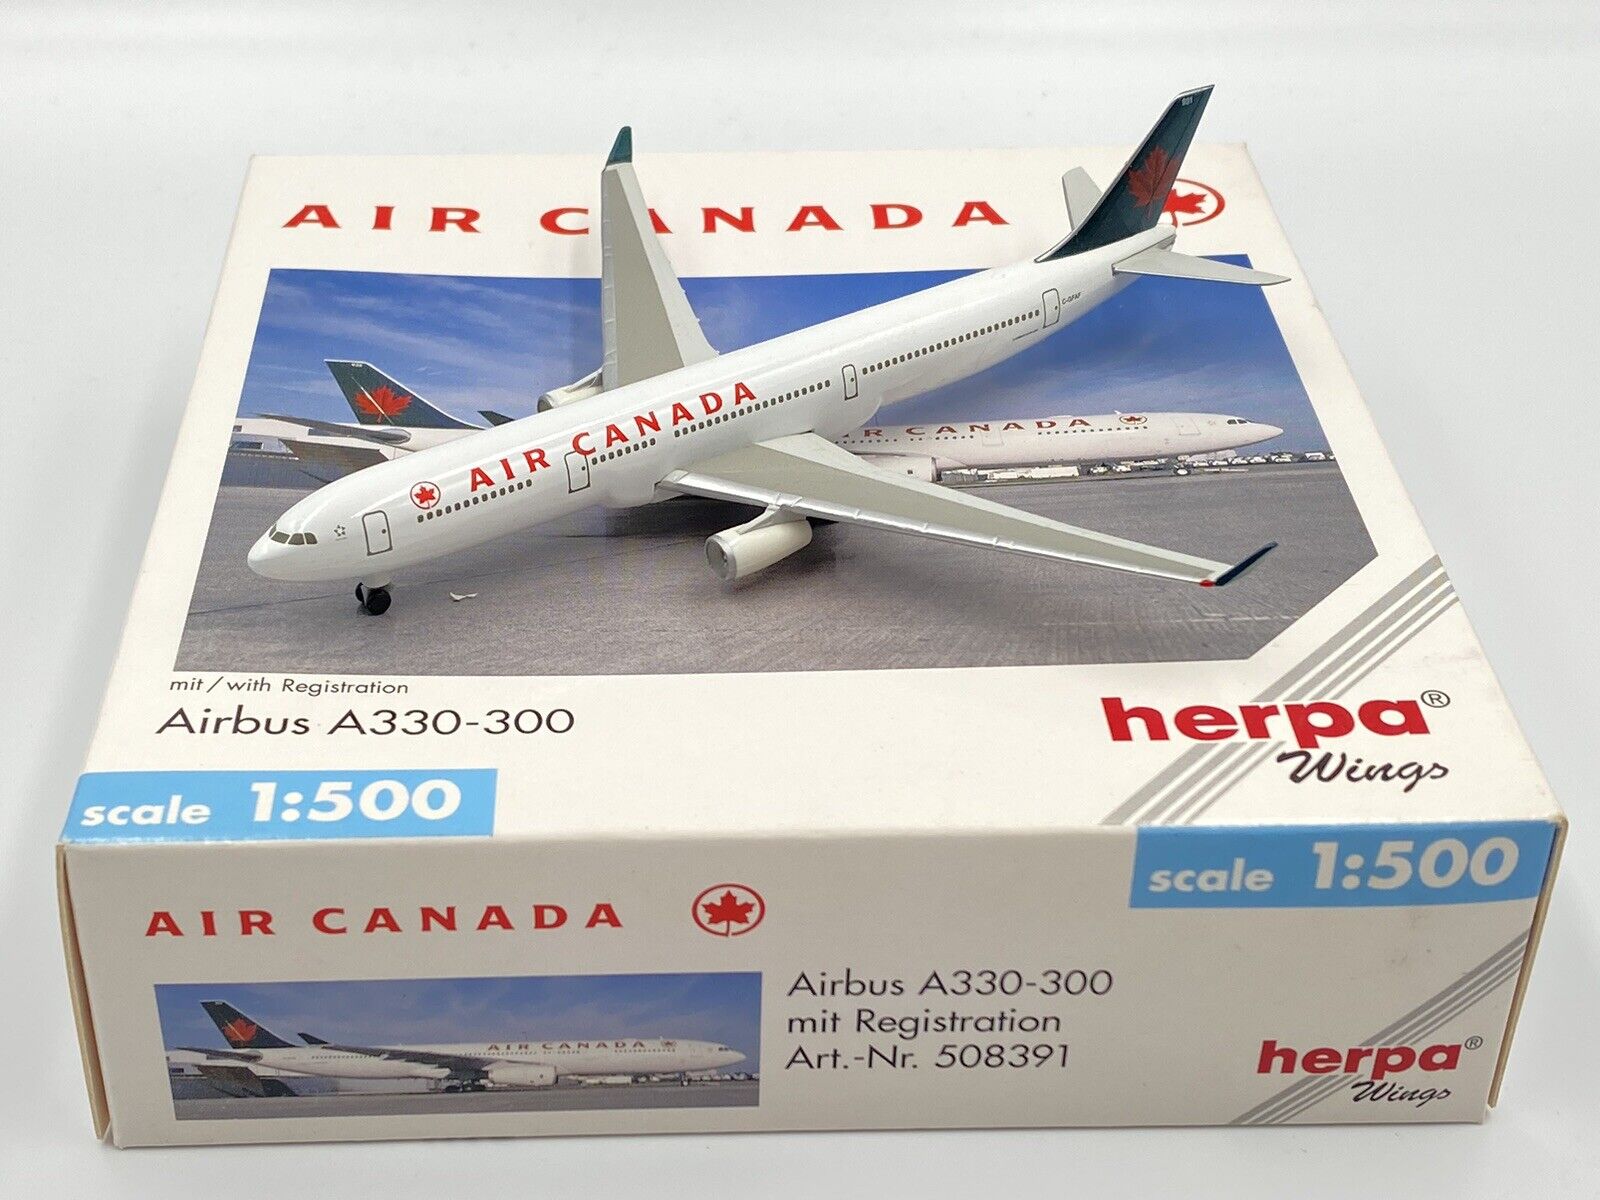 HERPA WINGS (508391) 1:500 AIR CANADA AIRBUS A330-300 BOXED 